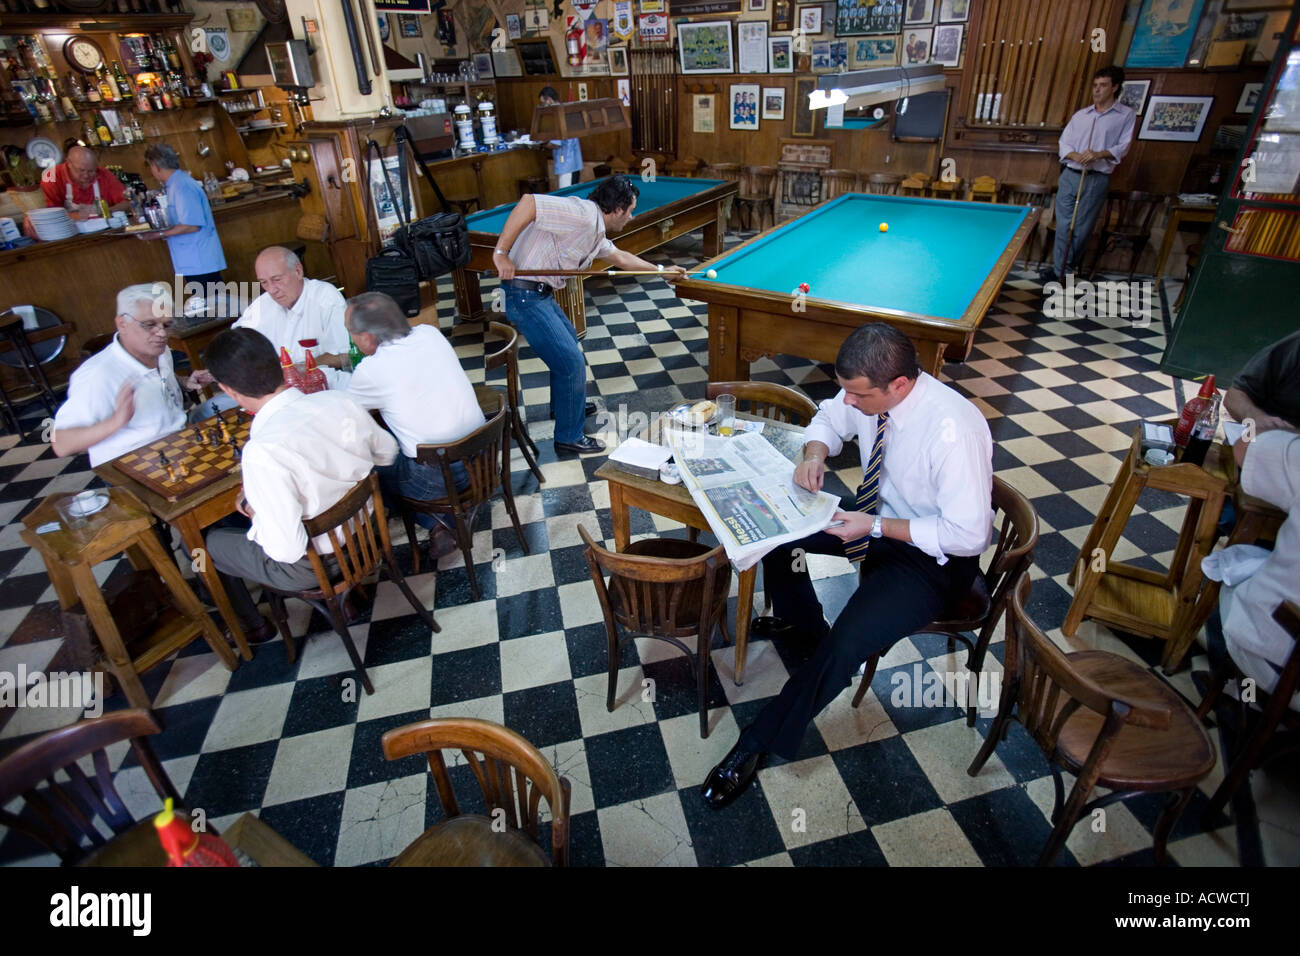 An everyday scene in a classic bar in Buenos Aires Argentina with billiards chess Stock Photo